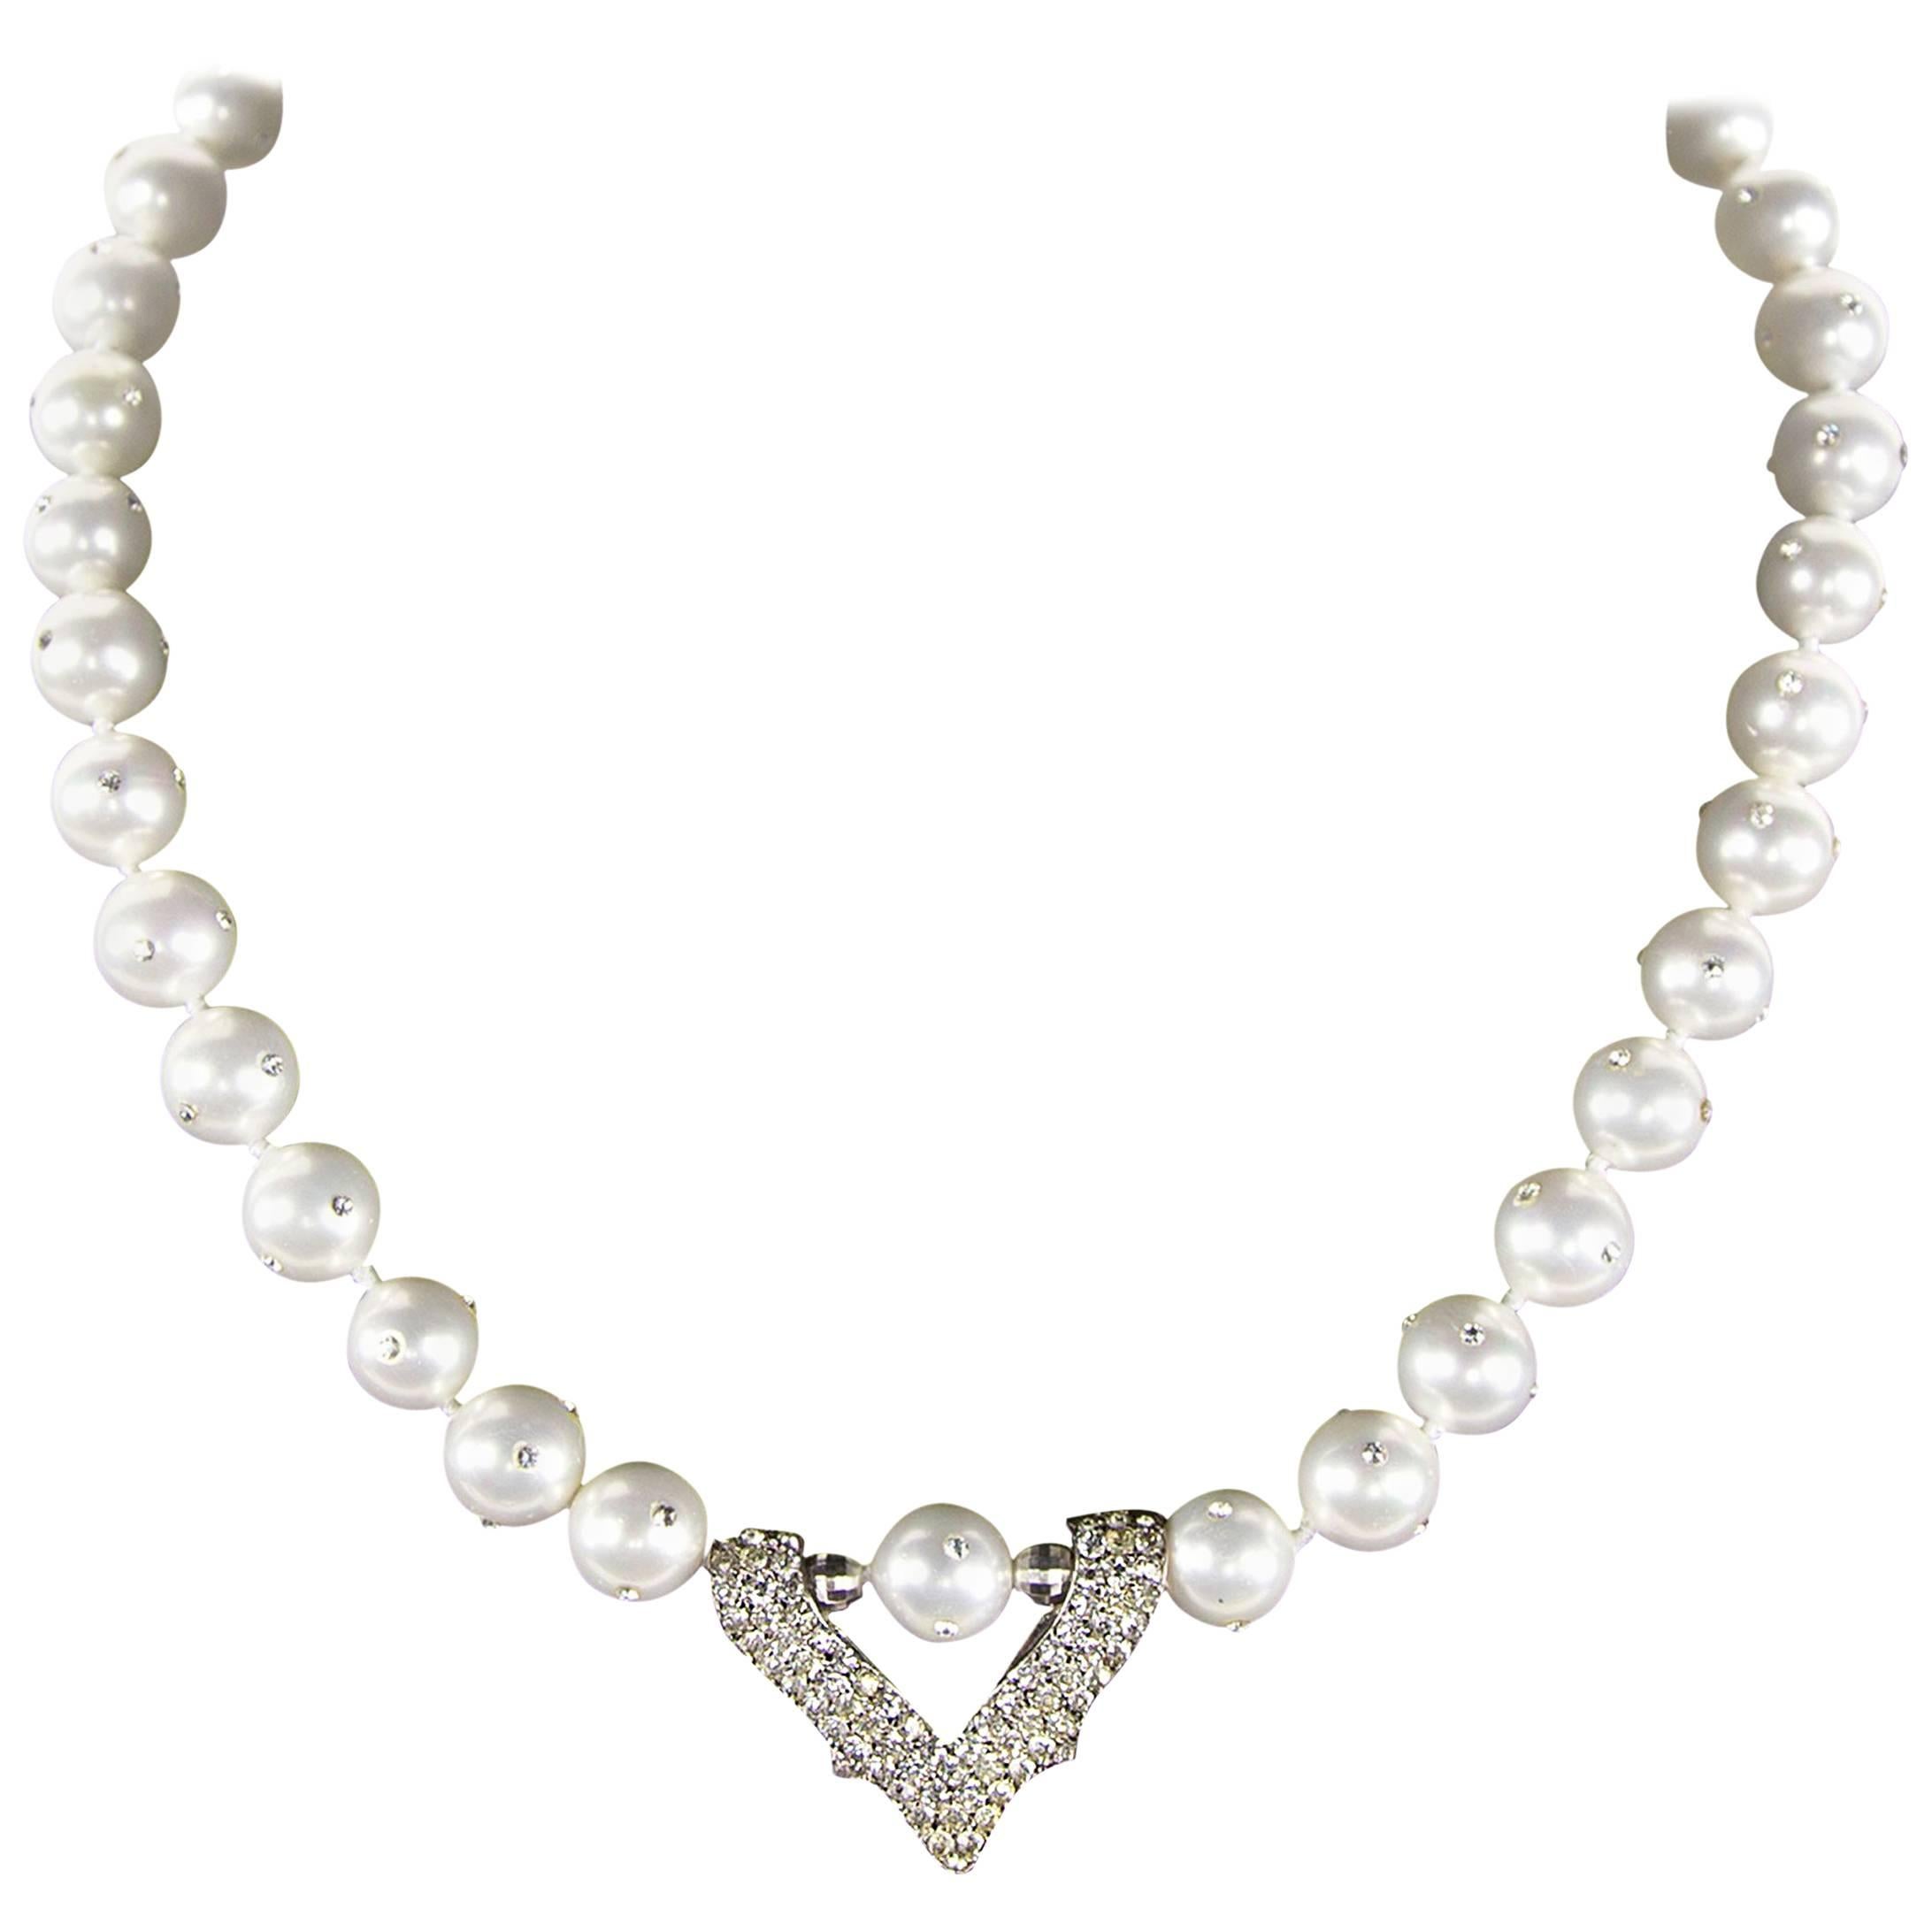 Stunning Faux Pearl and Diamante Necklace Estate Find For Sale